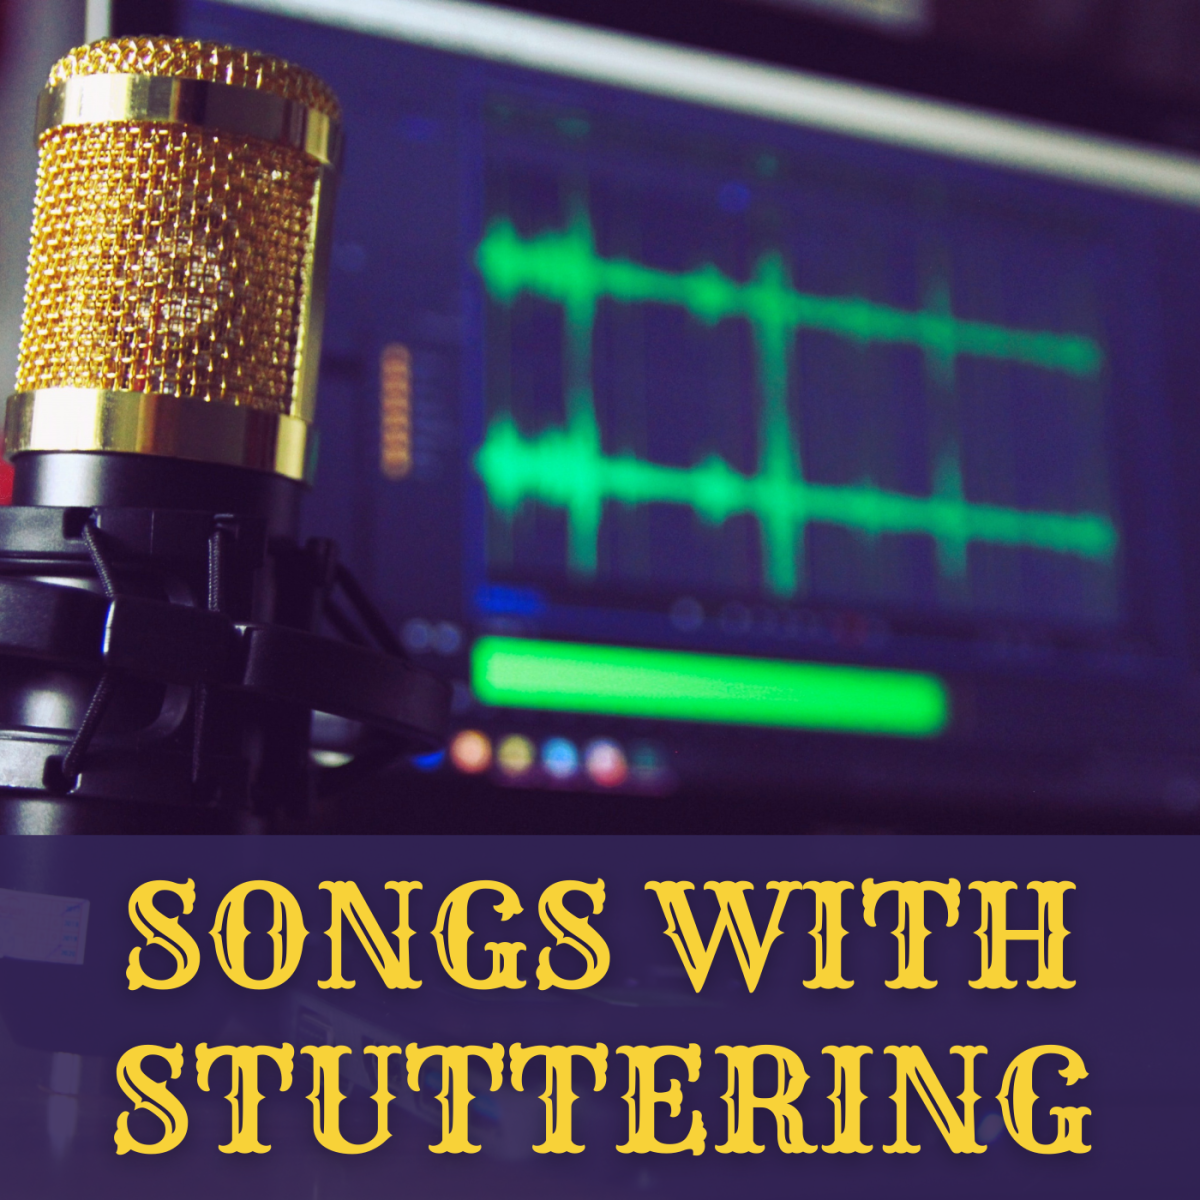 71 Songs With Stuttering